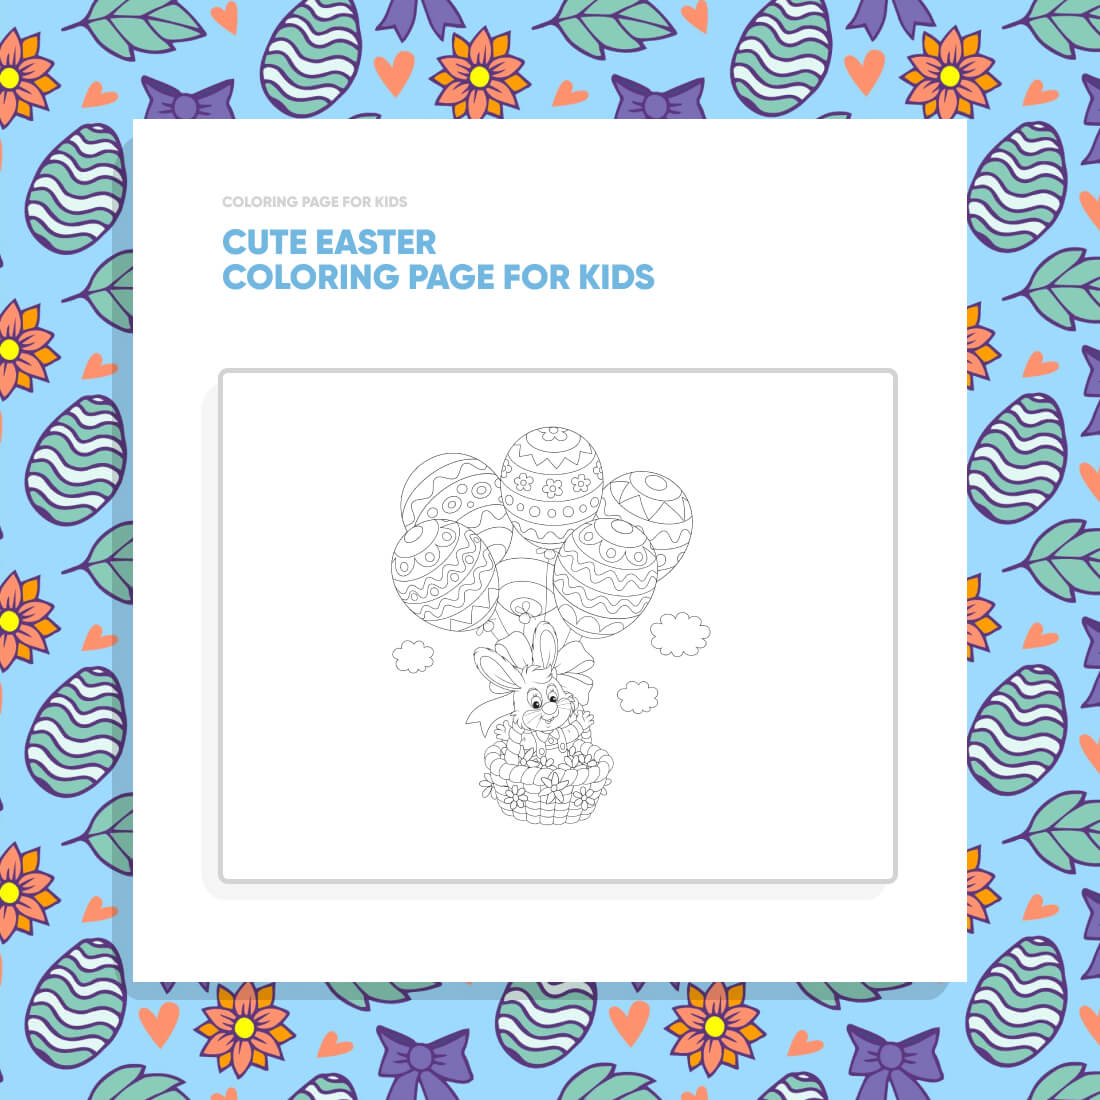 Cute Easter Coloring Page for Kids cover image.